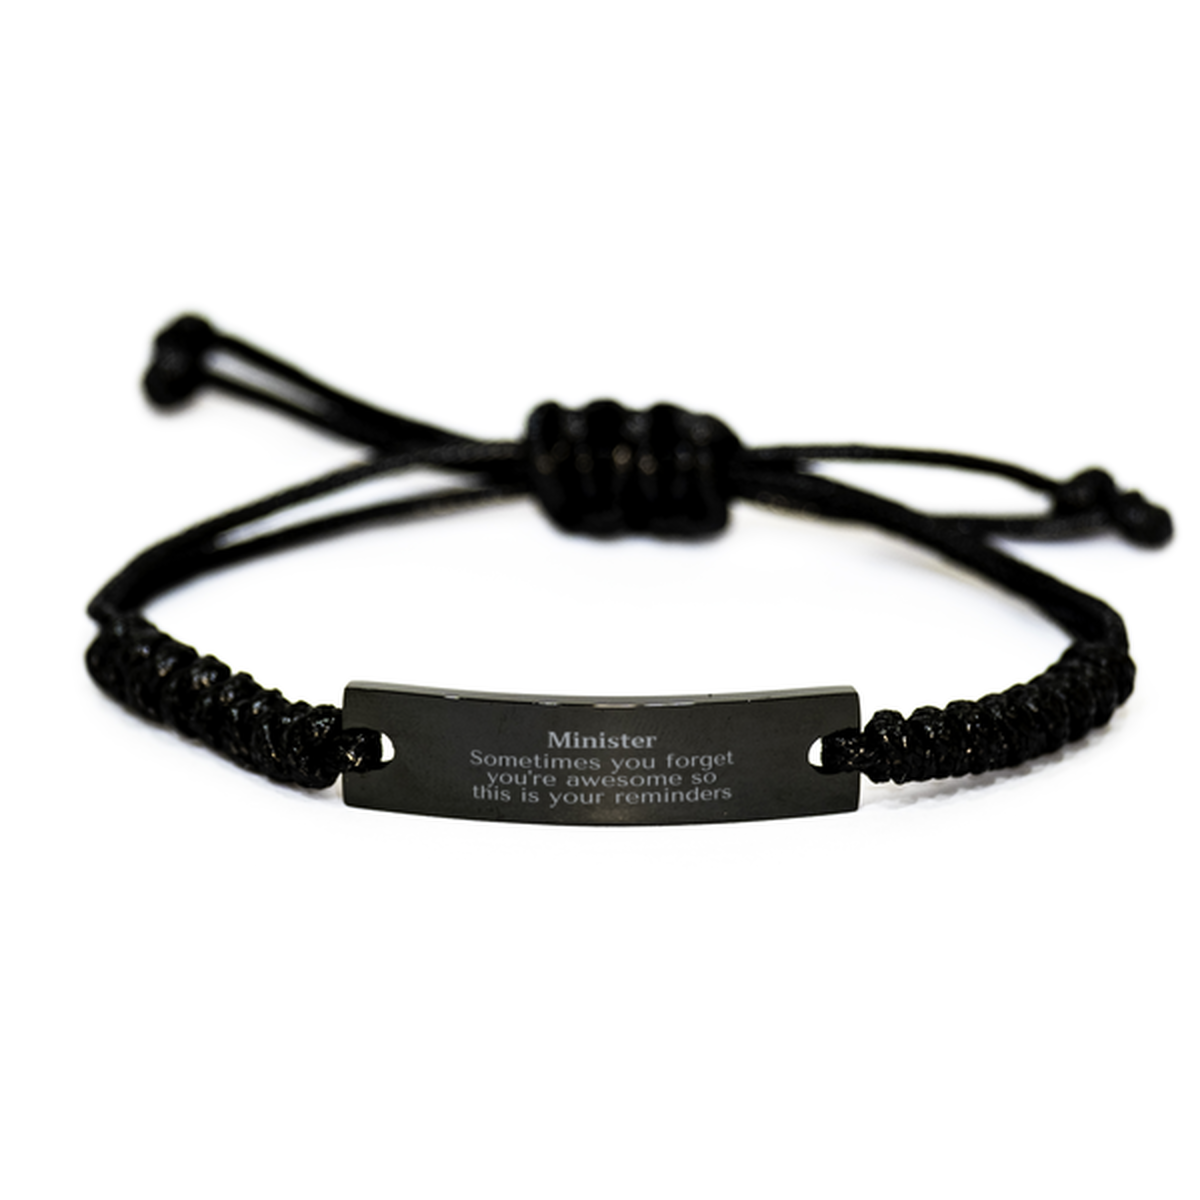 Sentimental Minister Black Rope Bracelet, Minister Sometimes you forget you're awesome so this is your reminders, Graduation Christmas Birthday Gifts for Minister, Men, Women, Coworkers